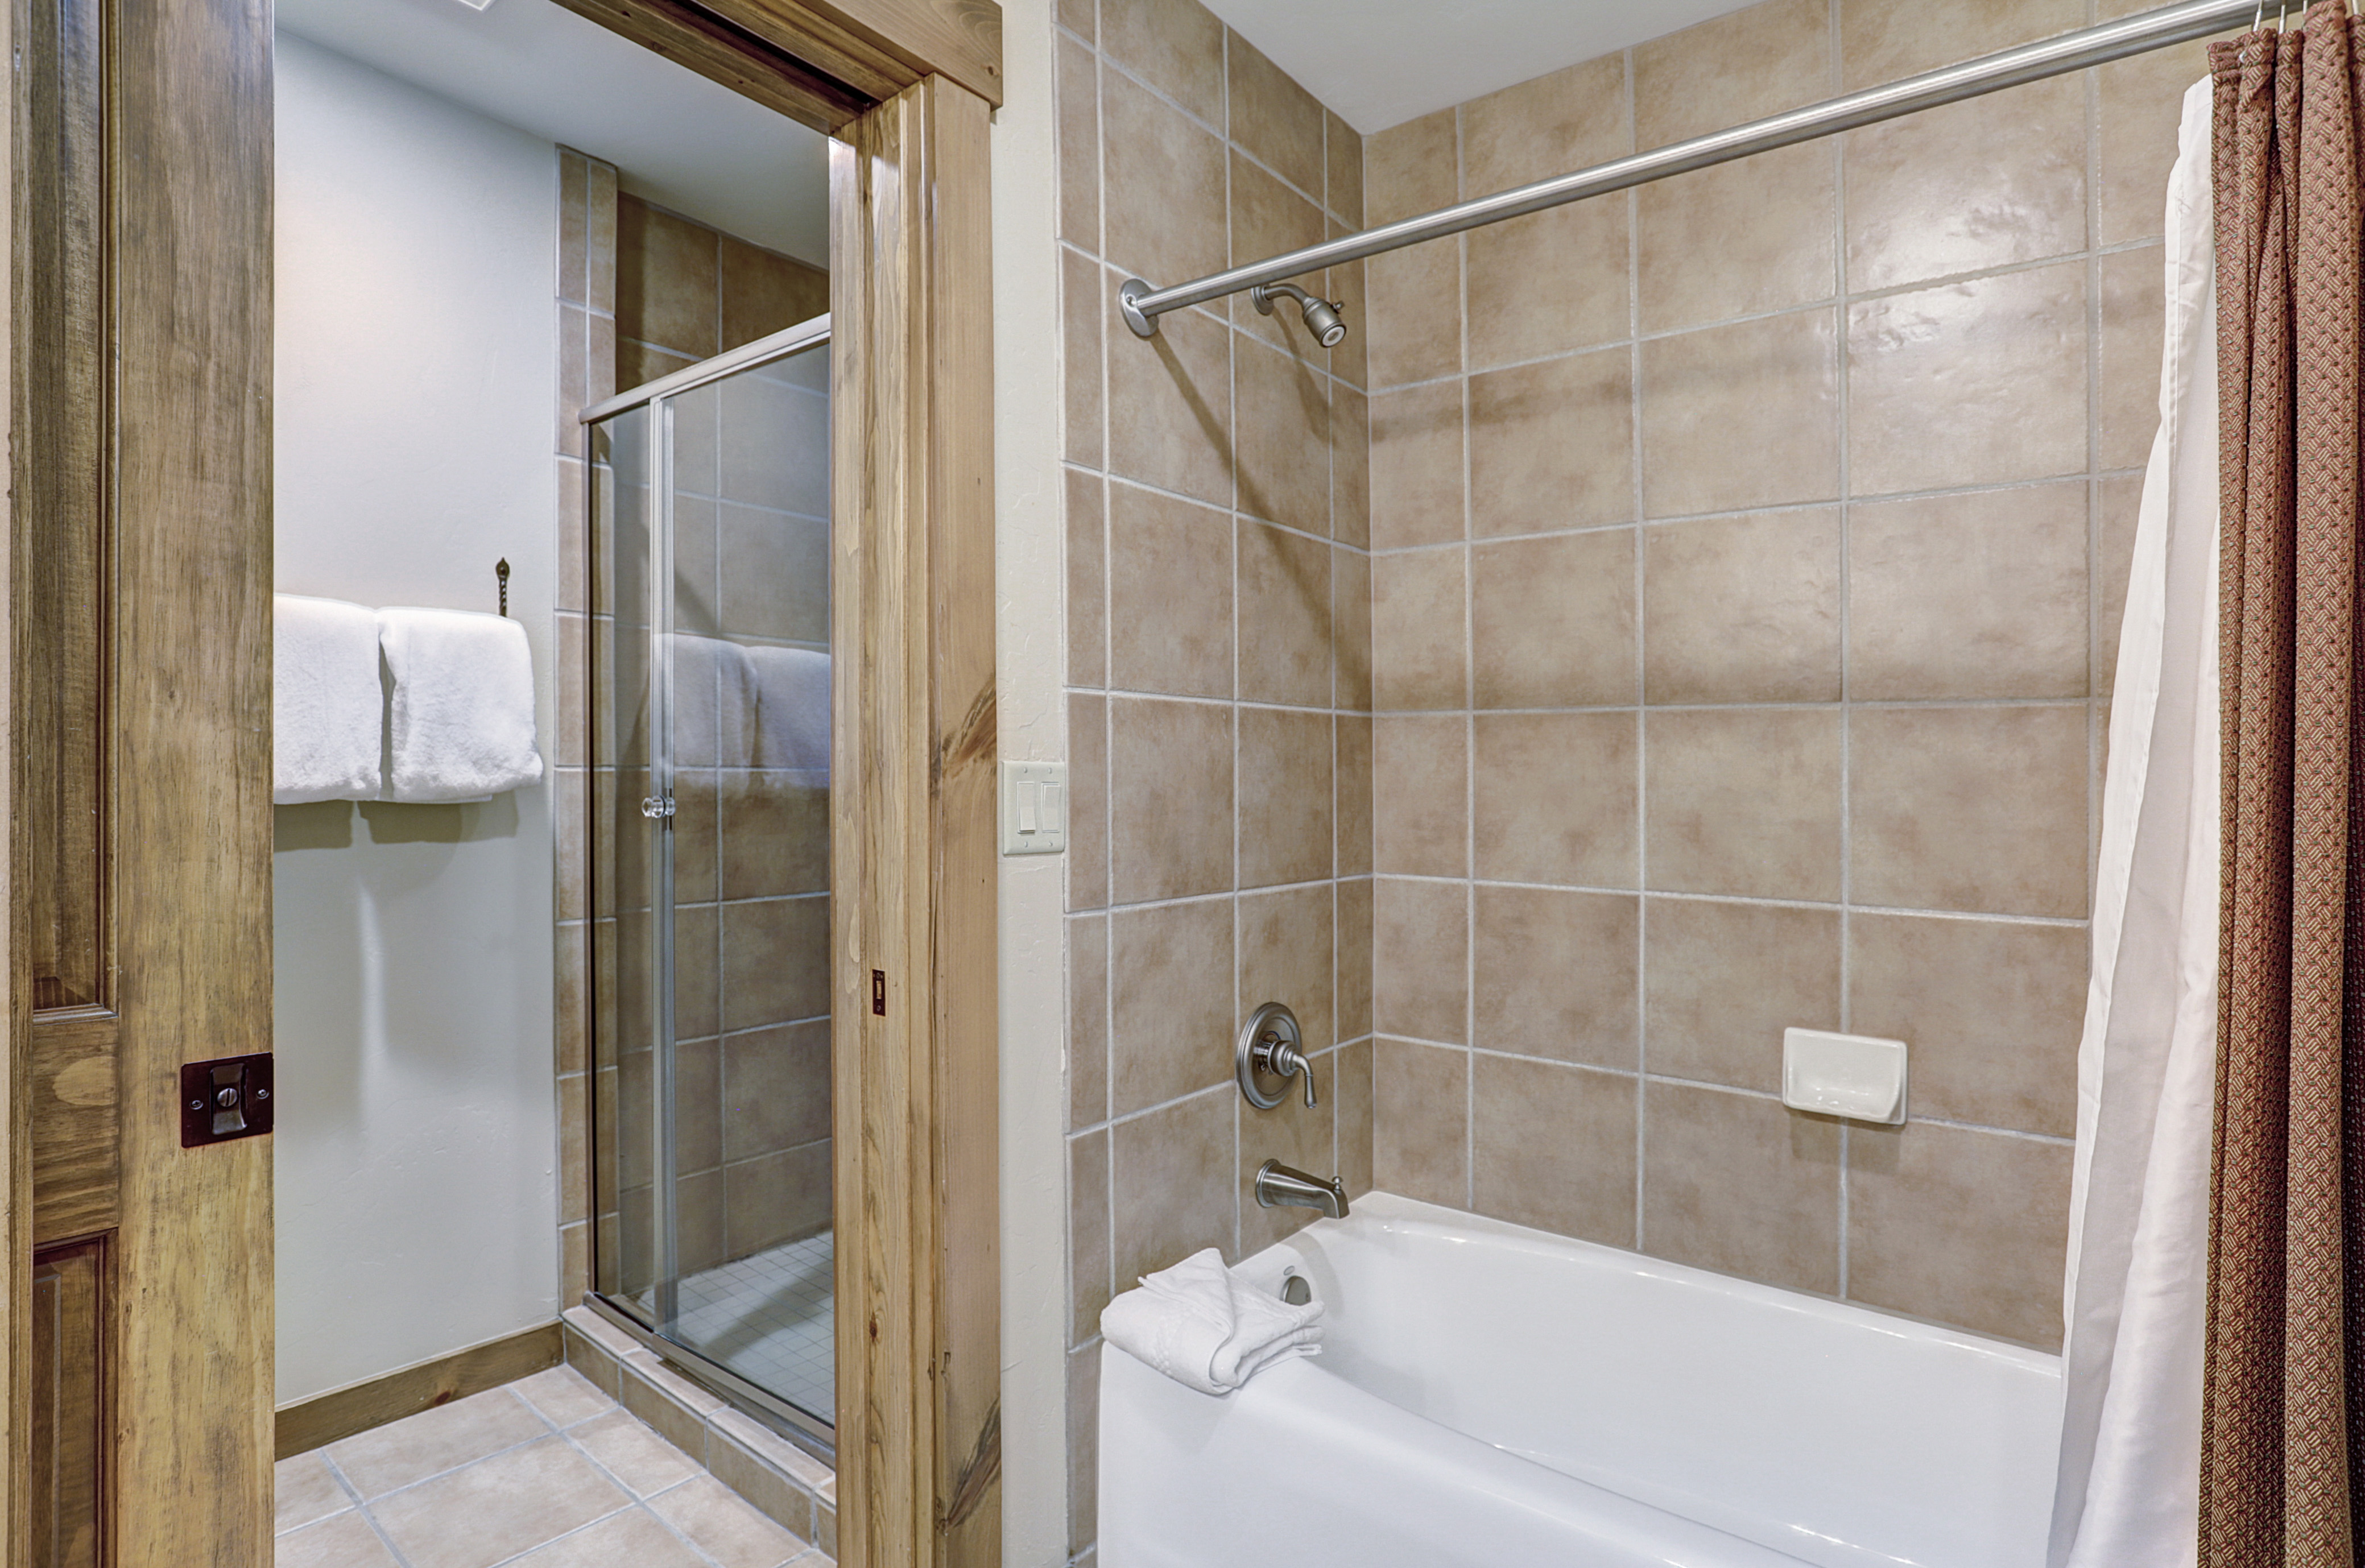 Master bathroom includes both a walk-in shower and combination bathtub/shower